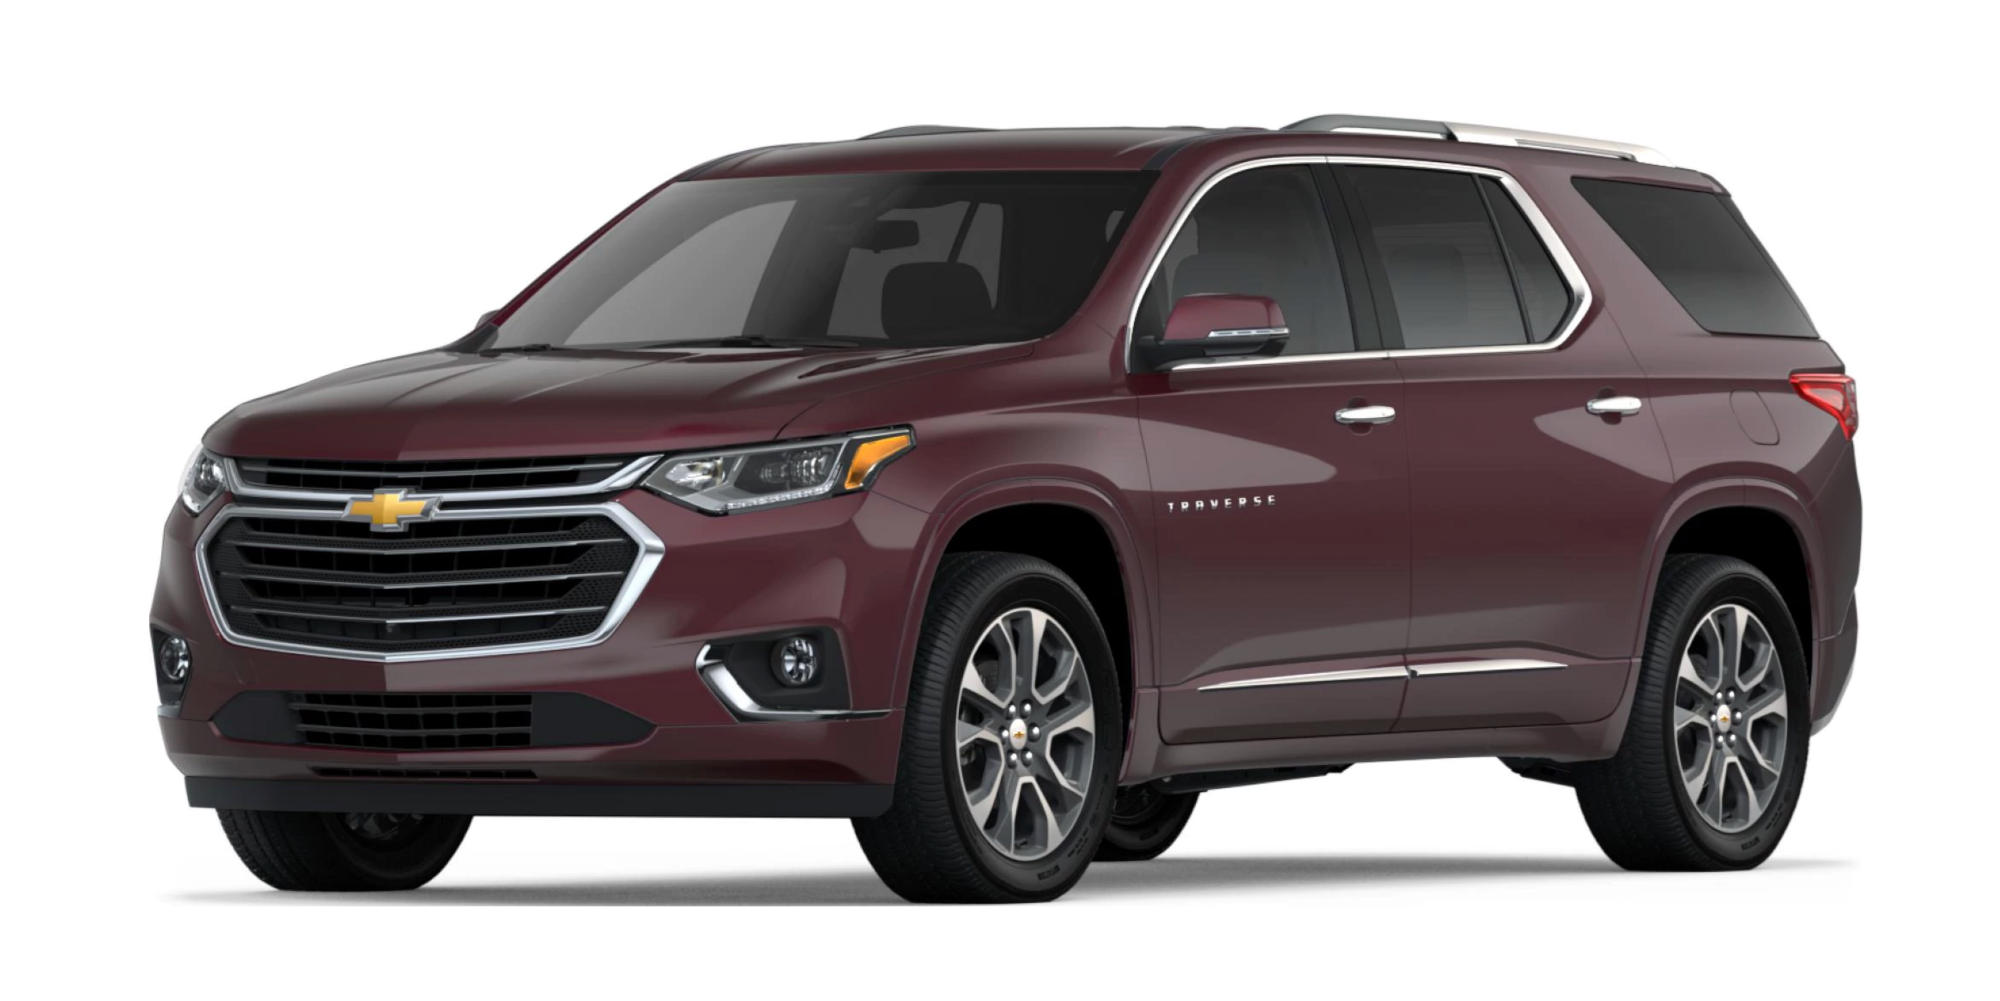 2021 Chevrolet Traverse LS Full Specs, Features and Price | CarBuzz